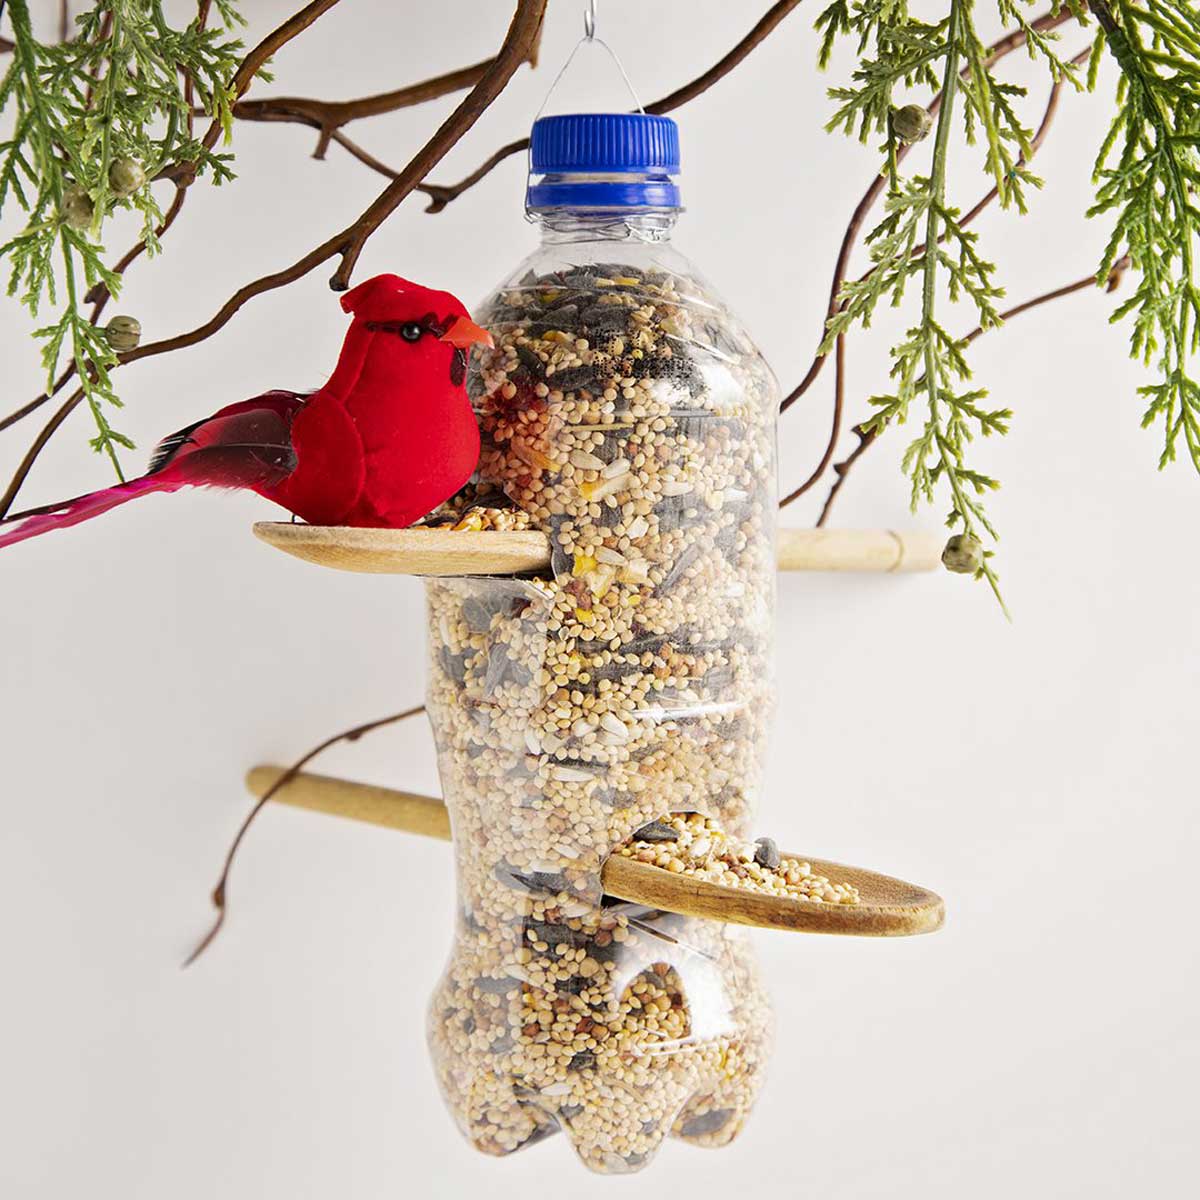 Recycled plastic bottle bird feeder filled with bird seed hanging from branches, and a red bird.